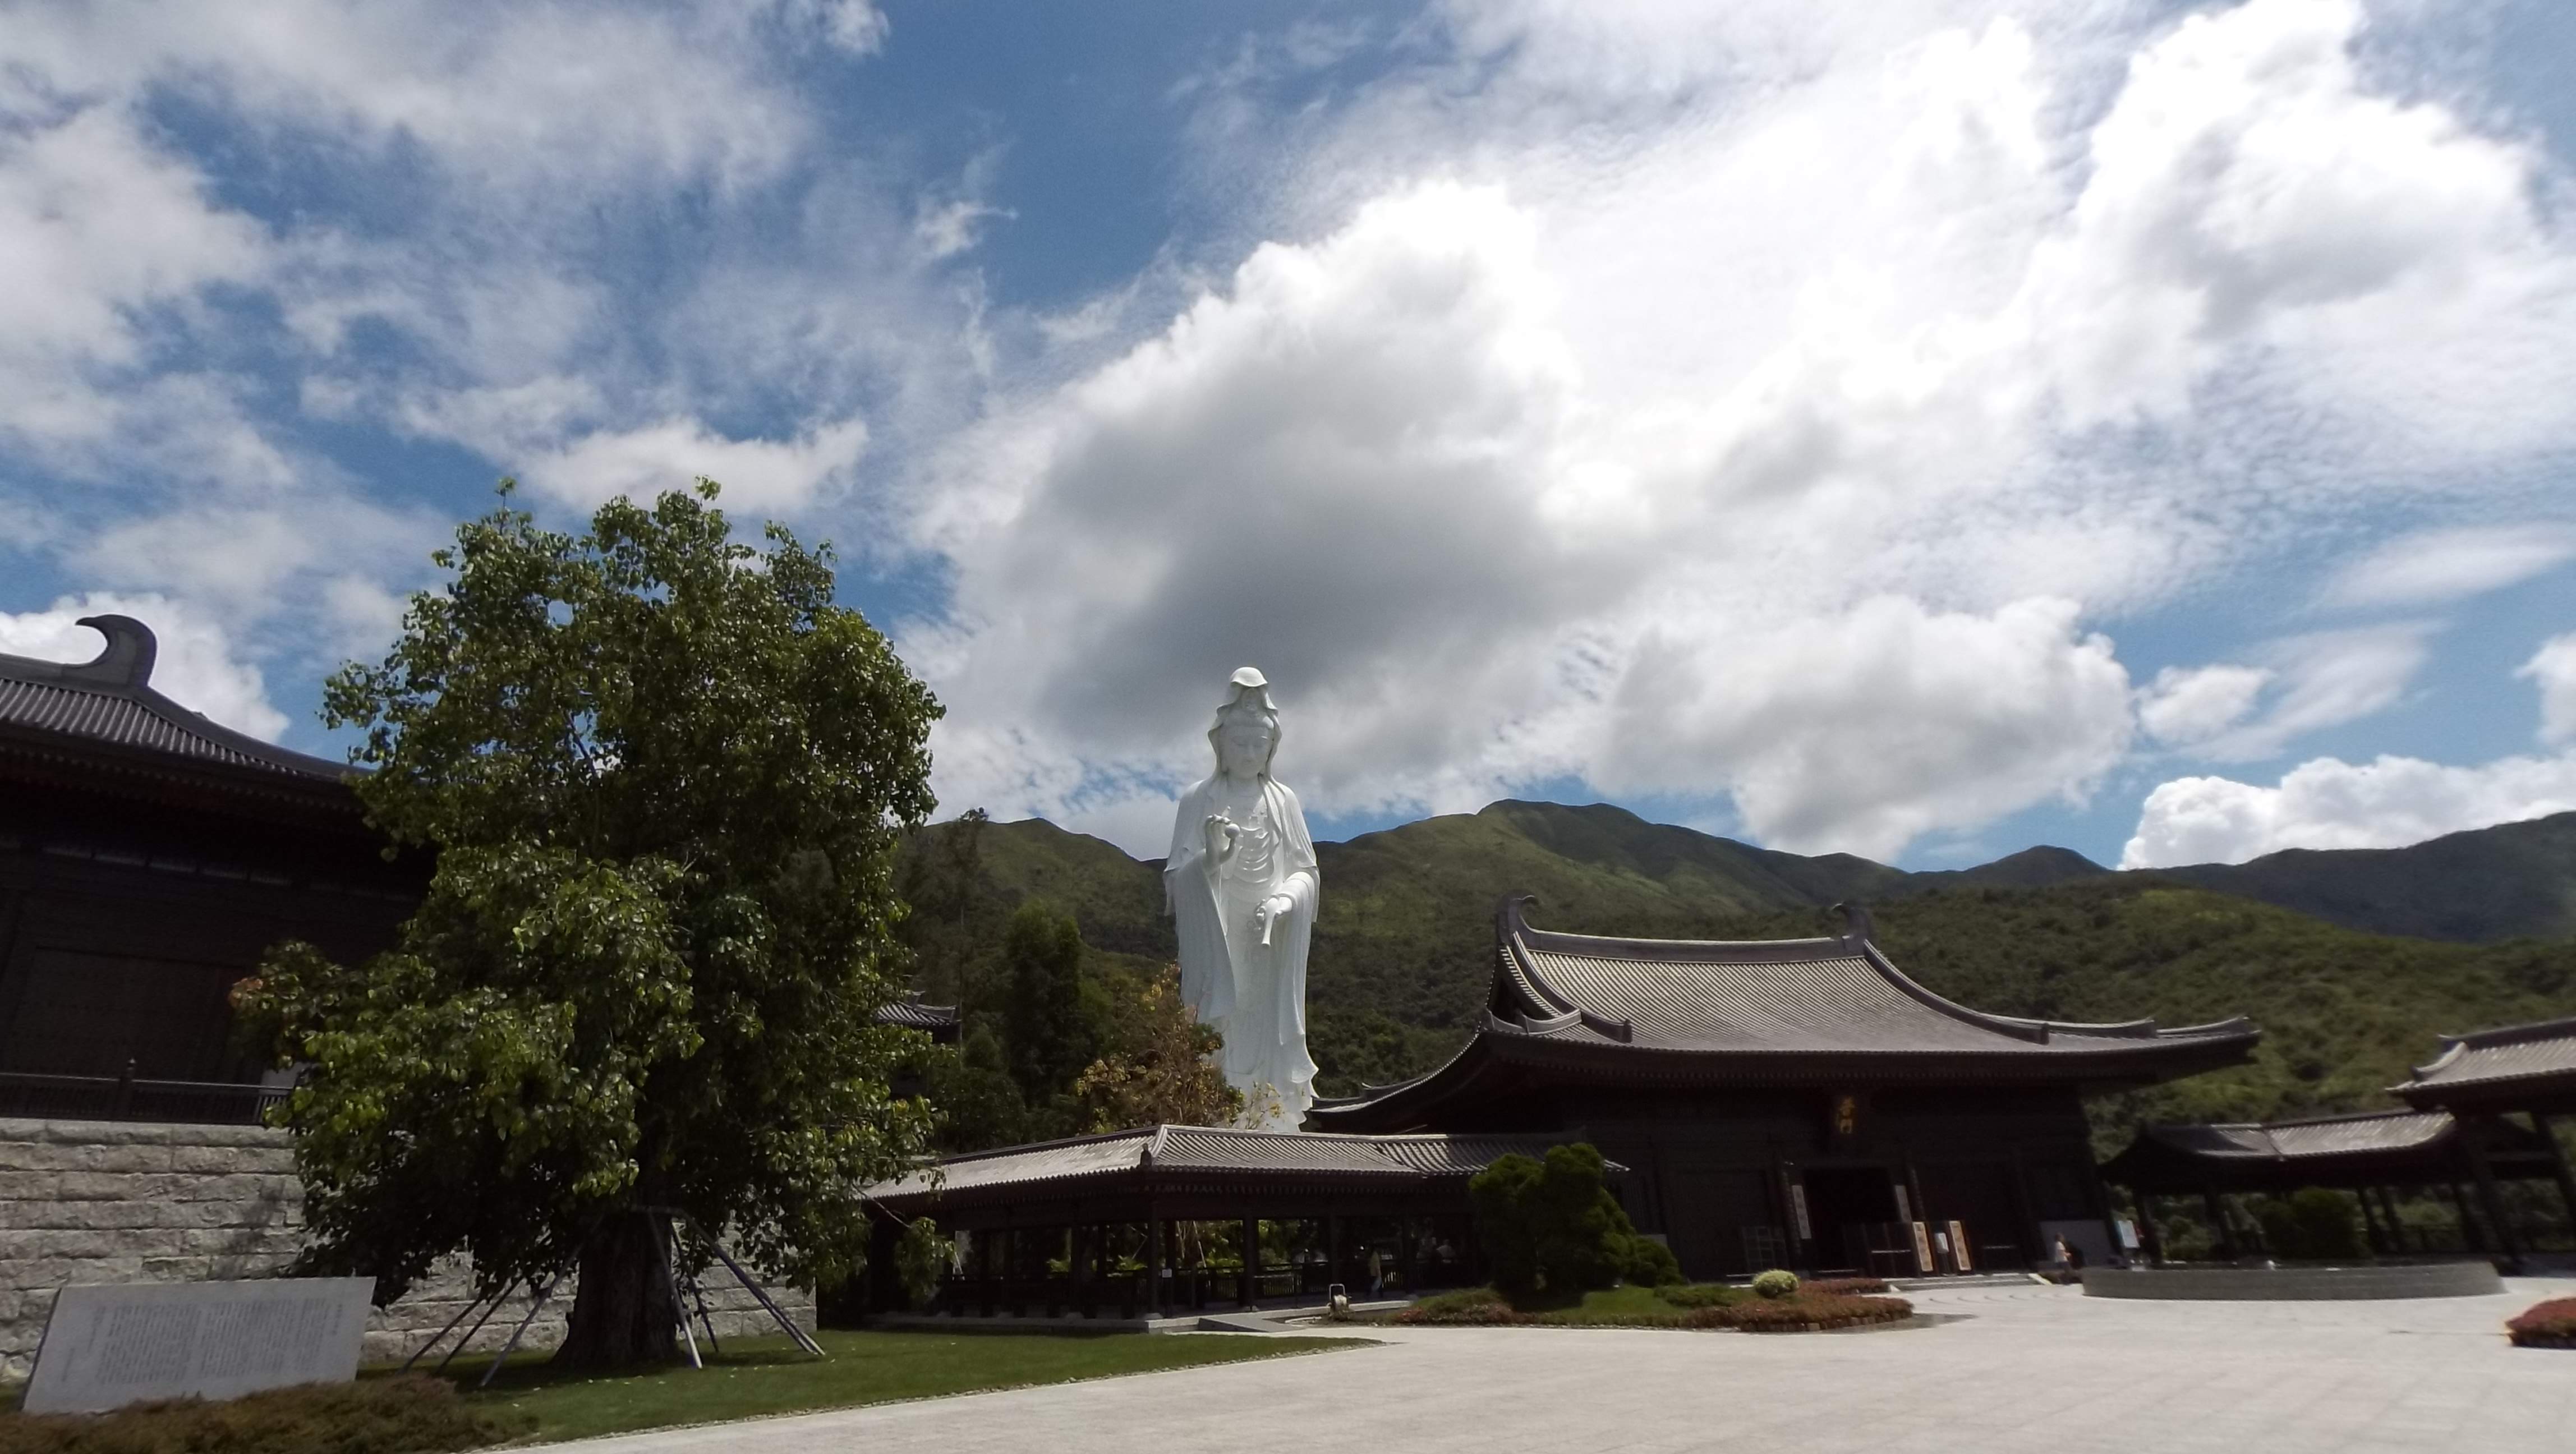 Goddess of Mercy Statue and wooden architectures in Tsz Shan Monastery.